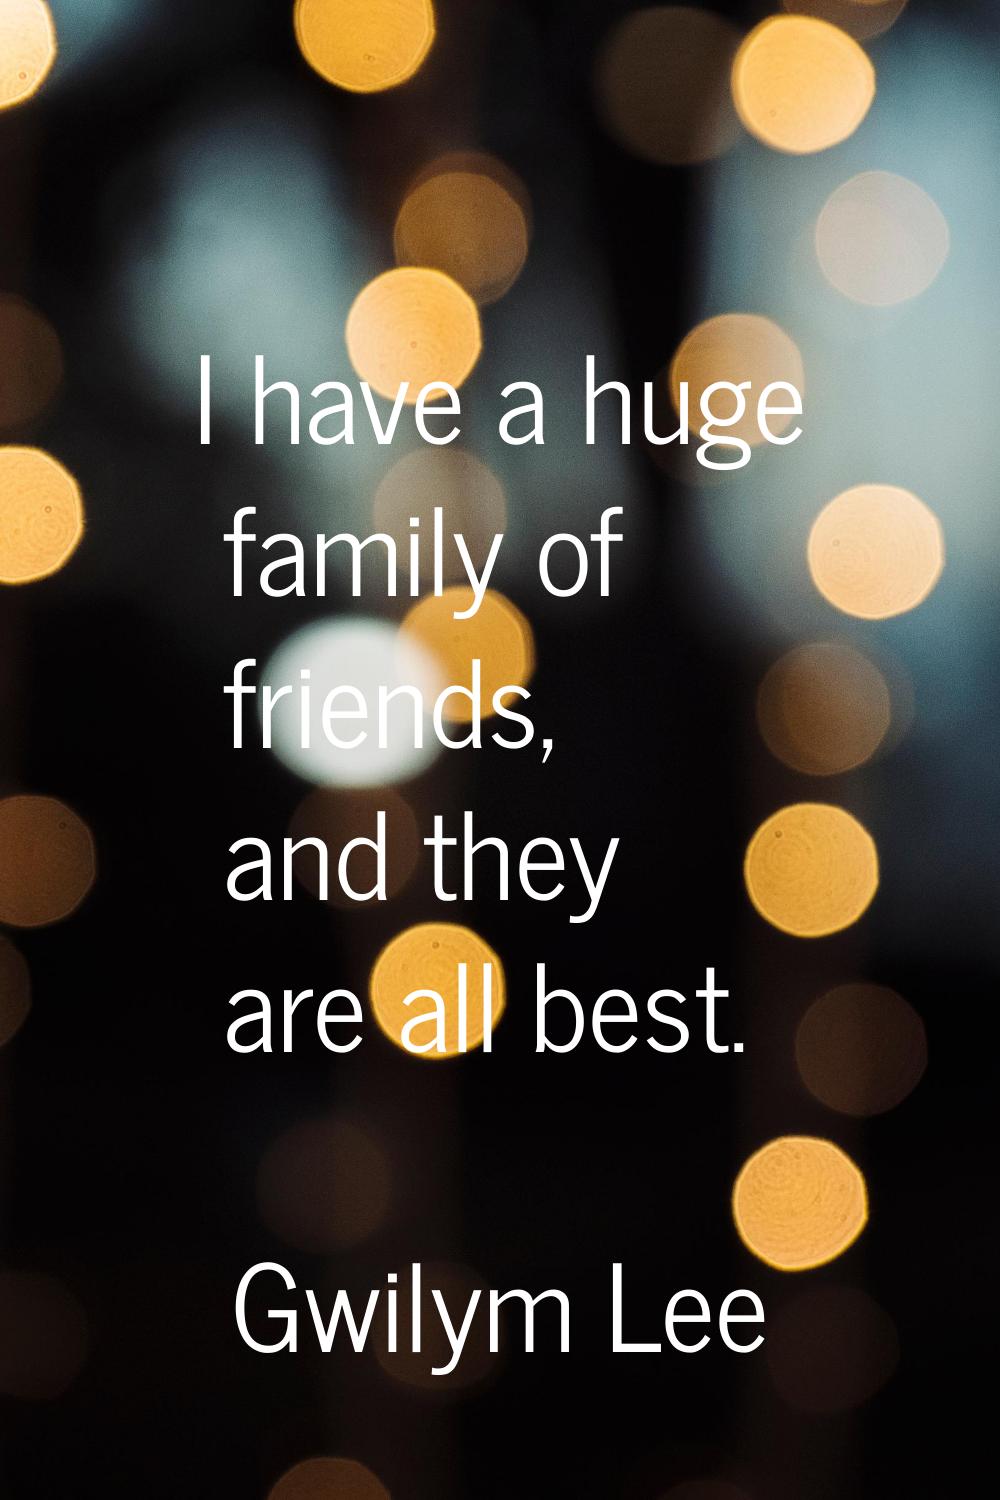 I have a huge family of friends, and they are all best.